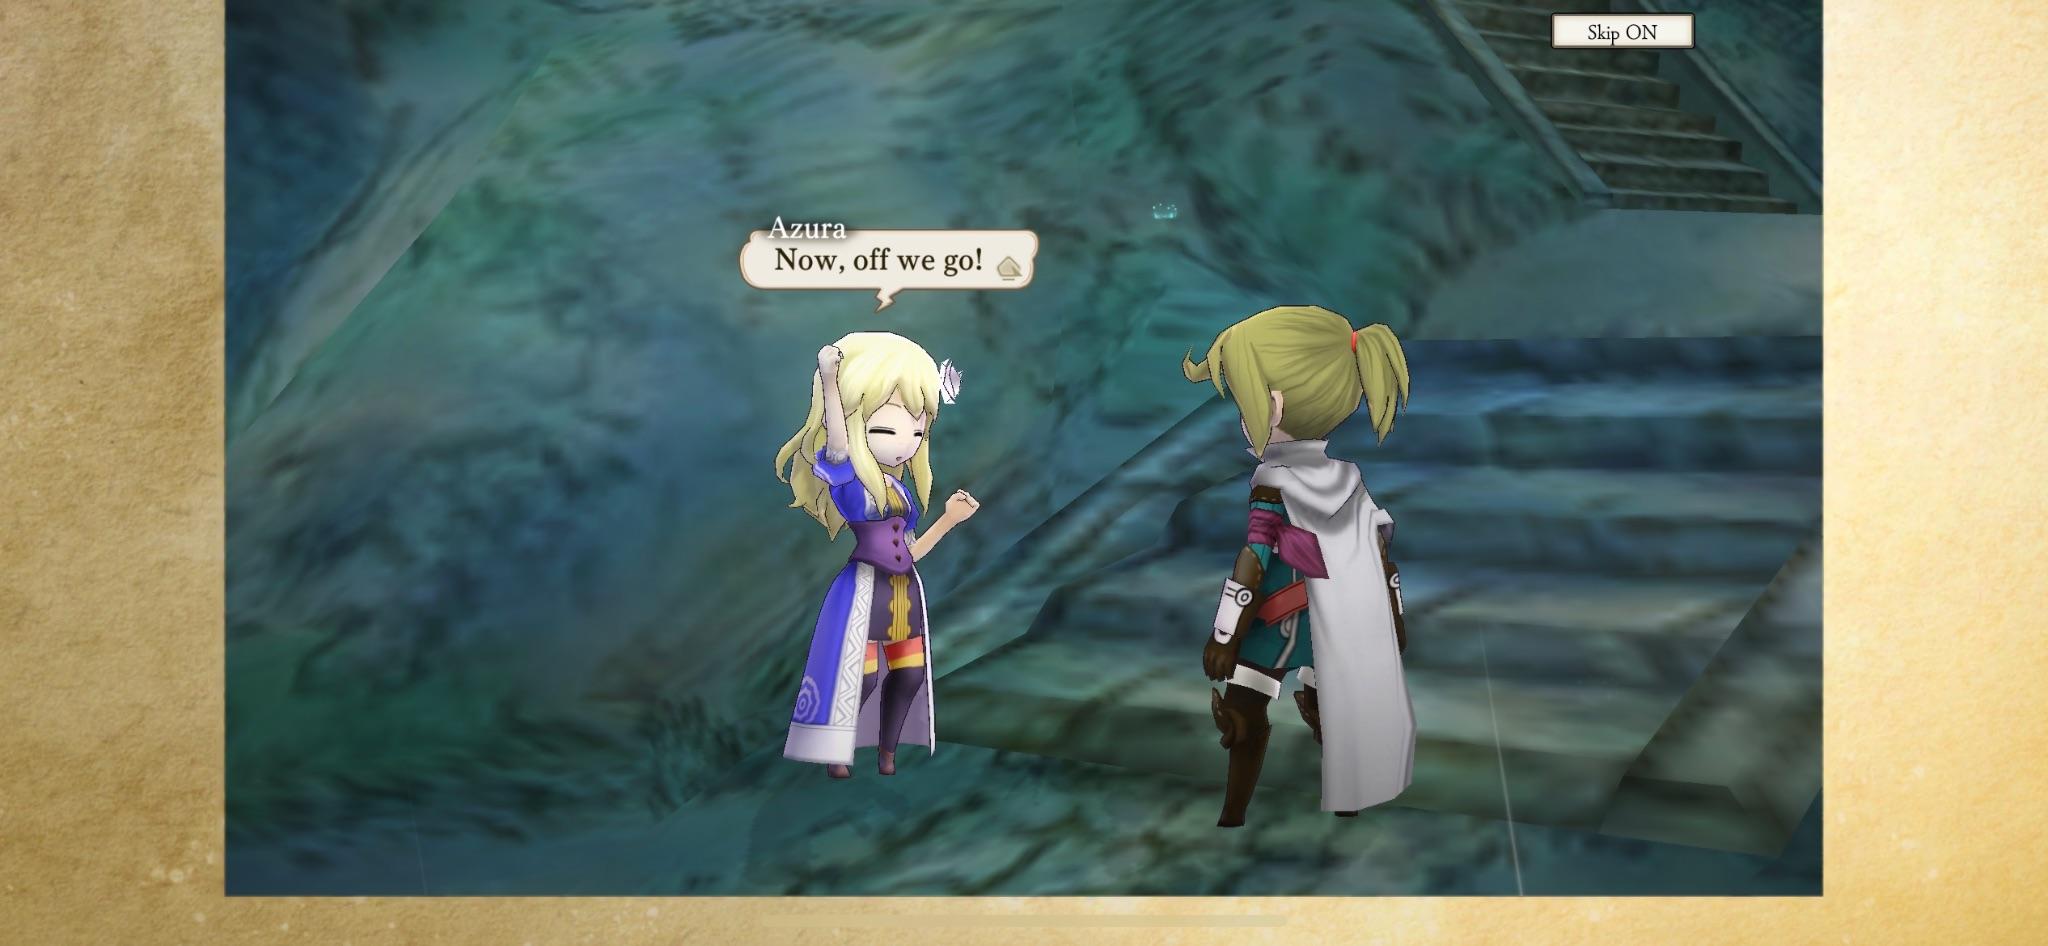 The Alliance Alive HD Remaster Makes Its Way to iOS and Android